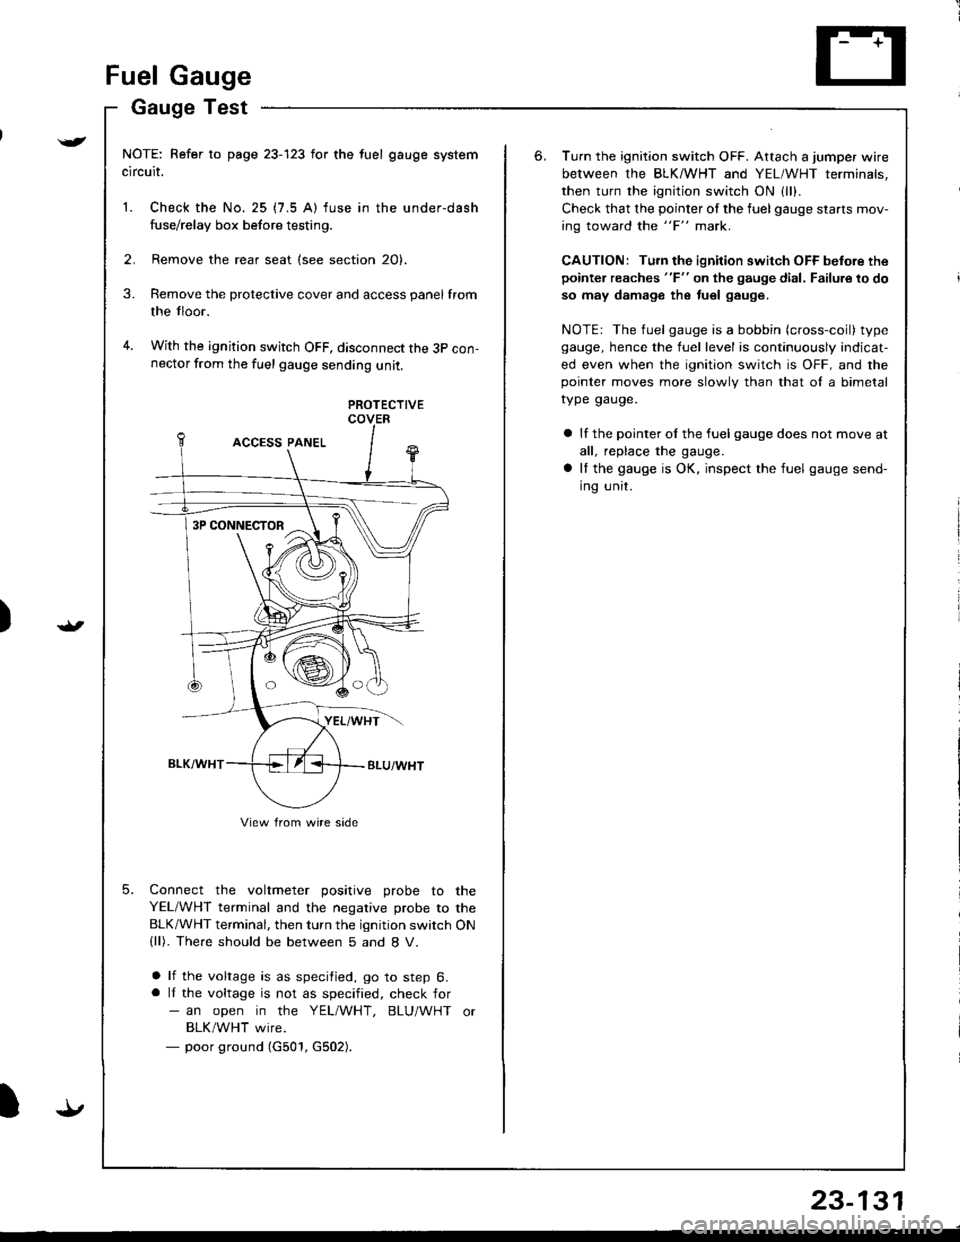 HONDA INTEGRA 1998 4.G Workshop Manual )
{
t.t
t.!
23-131
Fuel Gauge
Gauge Test
NOTE: Refer to page 23-123 for the fuel gauge system
circuit.
1. Check the No. 25 (7.5 A) fuse in the under-dash
fuse/relay box before testing.
2. Remove the r